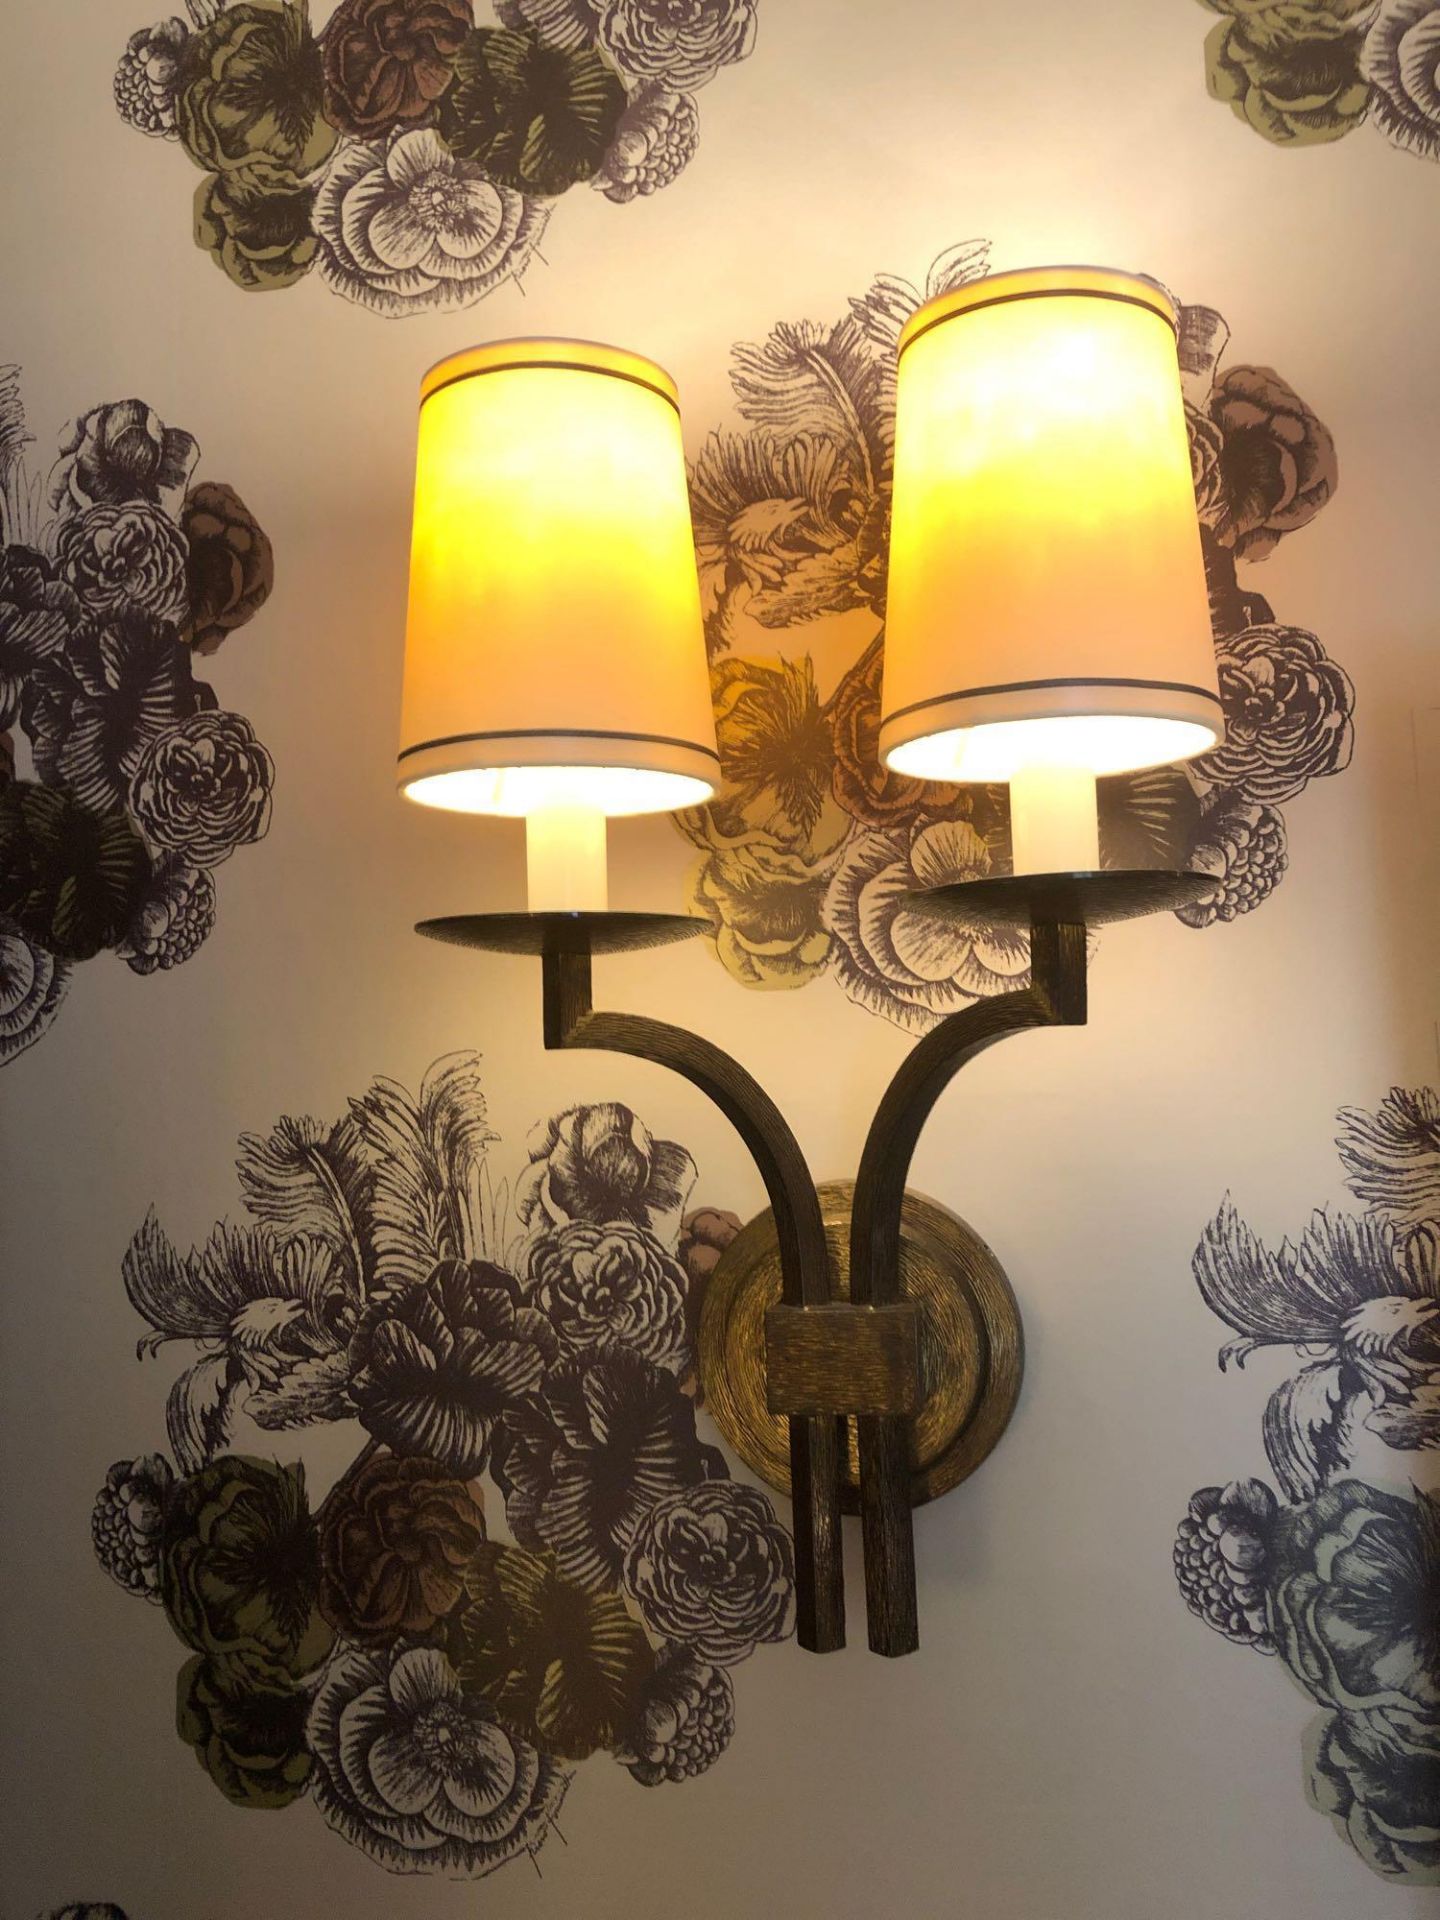 A Pair Of Dernier And Hamlyn Twin Arm Antique Bronzed Wall Sconces With Shade 51cm (Room 512)